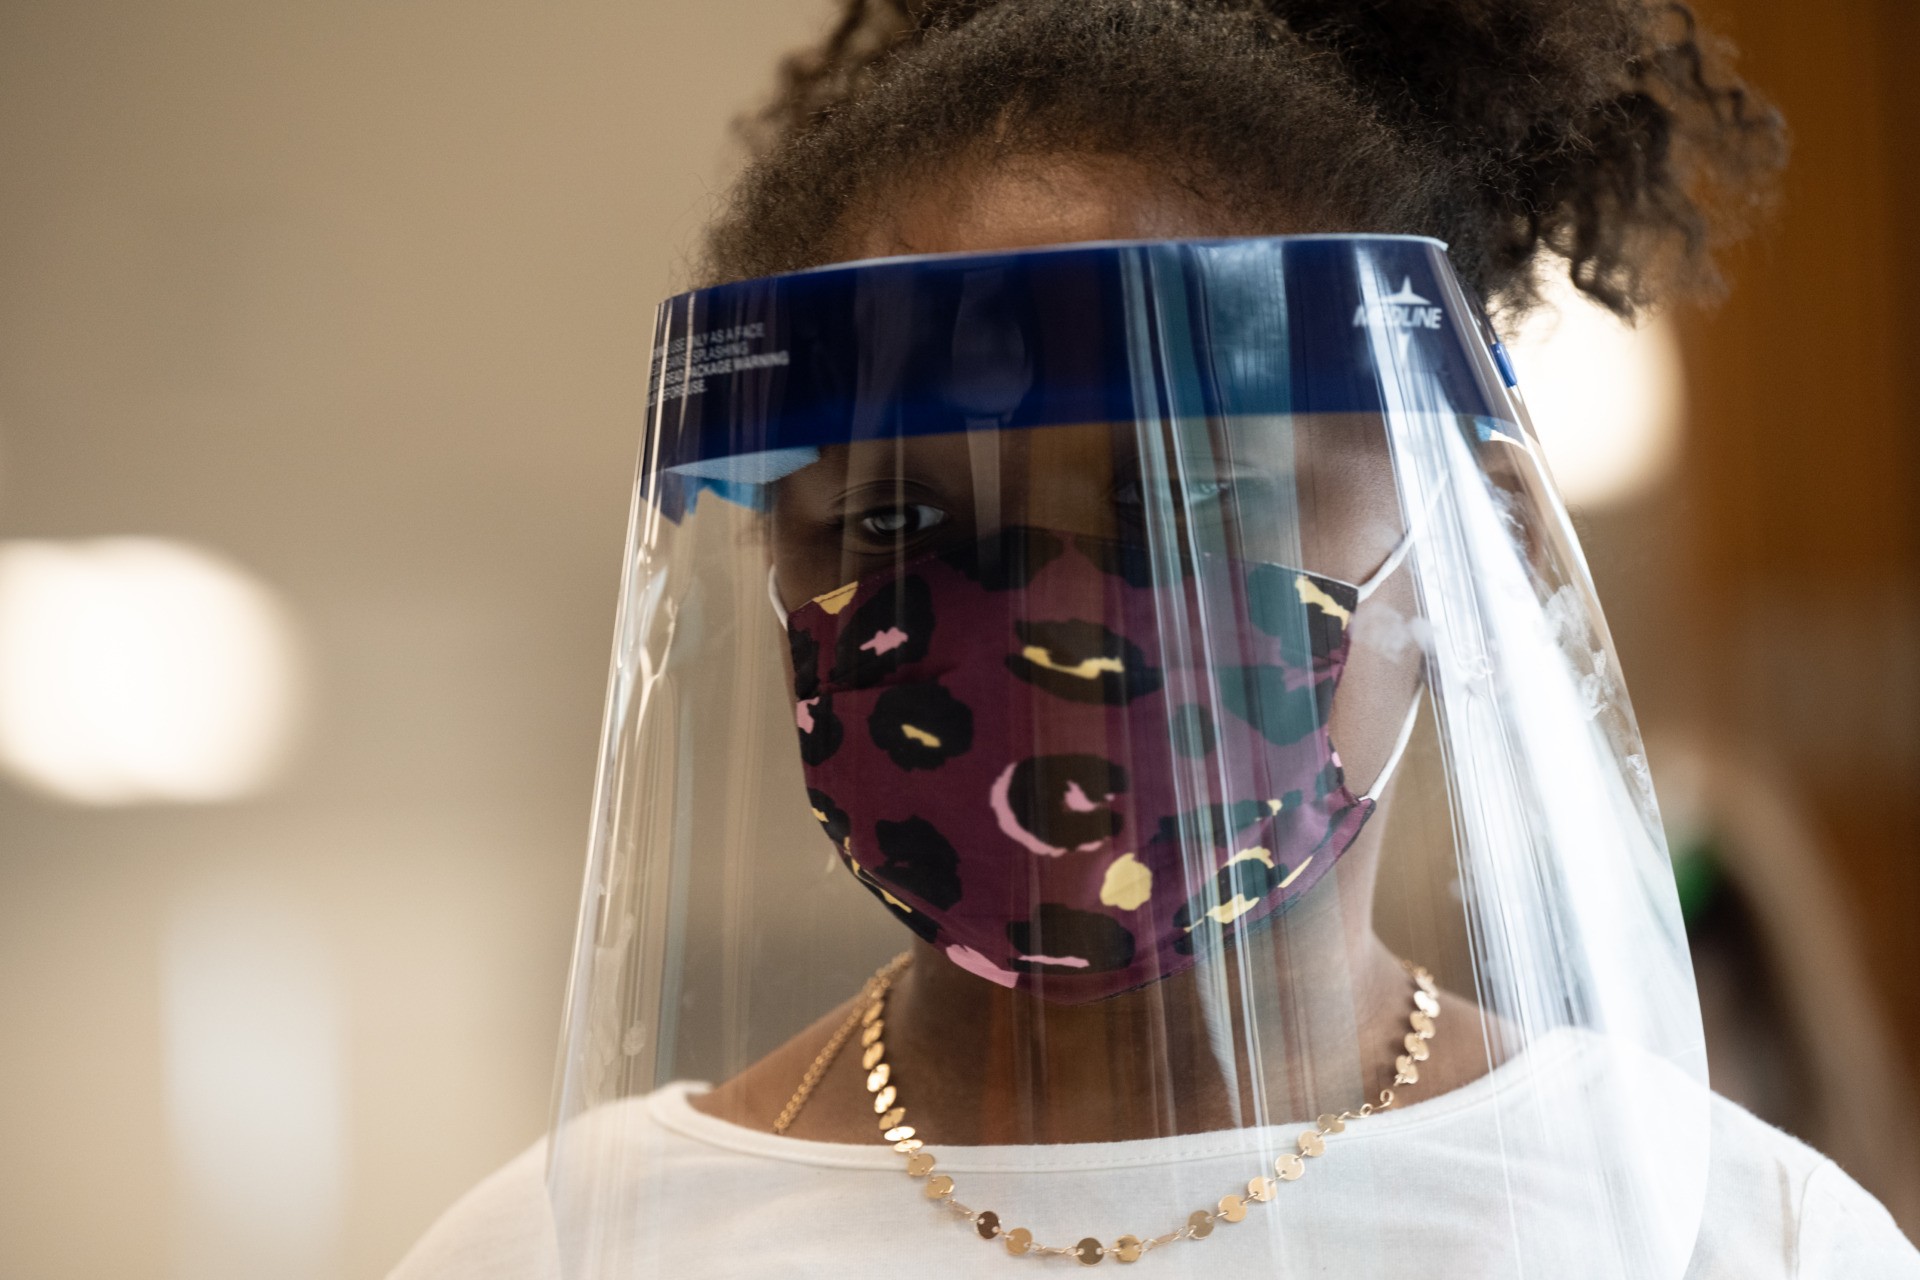 LOUISVILLE, KY - MARCH 17: A child wearing a face shield and mask stands in the cafeteria of Medora Elementary School on March 17, 2021 in Louisville, Kentucky. Today marks the reopening of Jefferson County Public Schools for in-person learning with new COVID-19 procedures in place. (Photo by Jon Cherry/Getty Images)